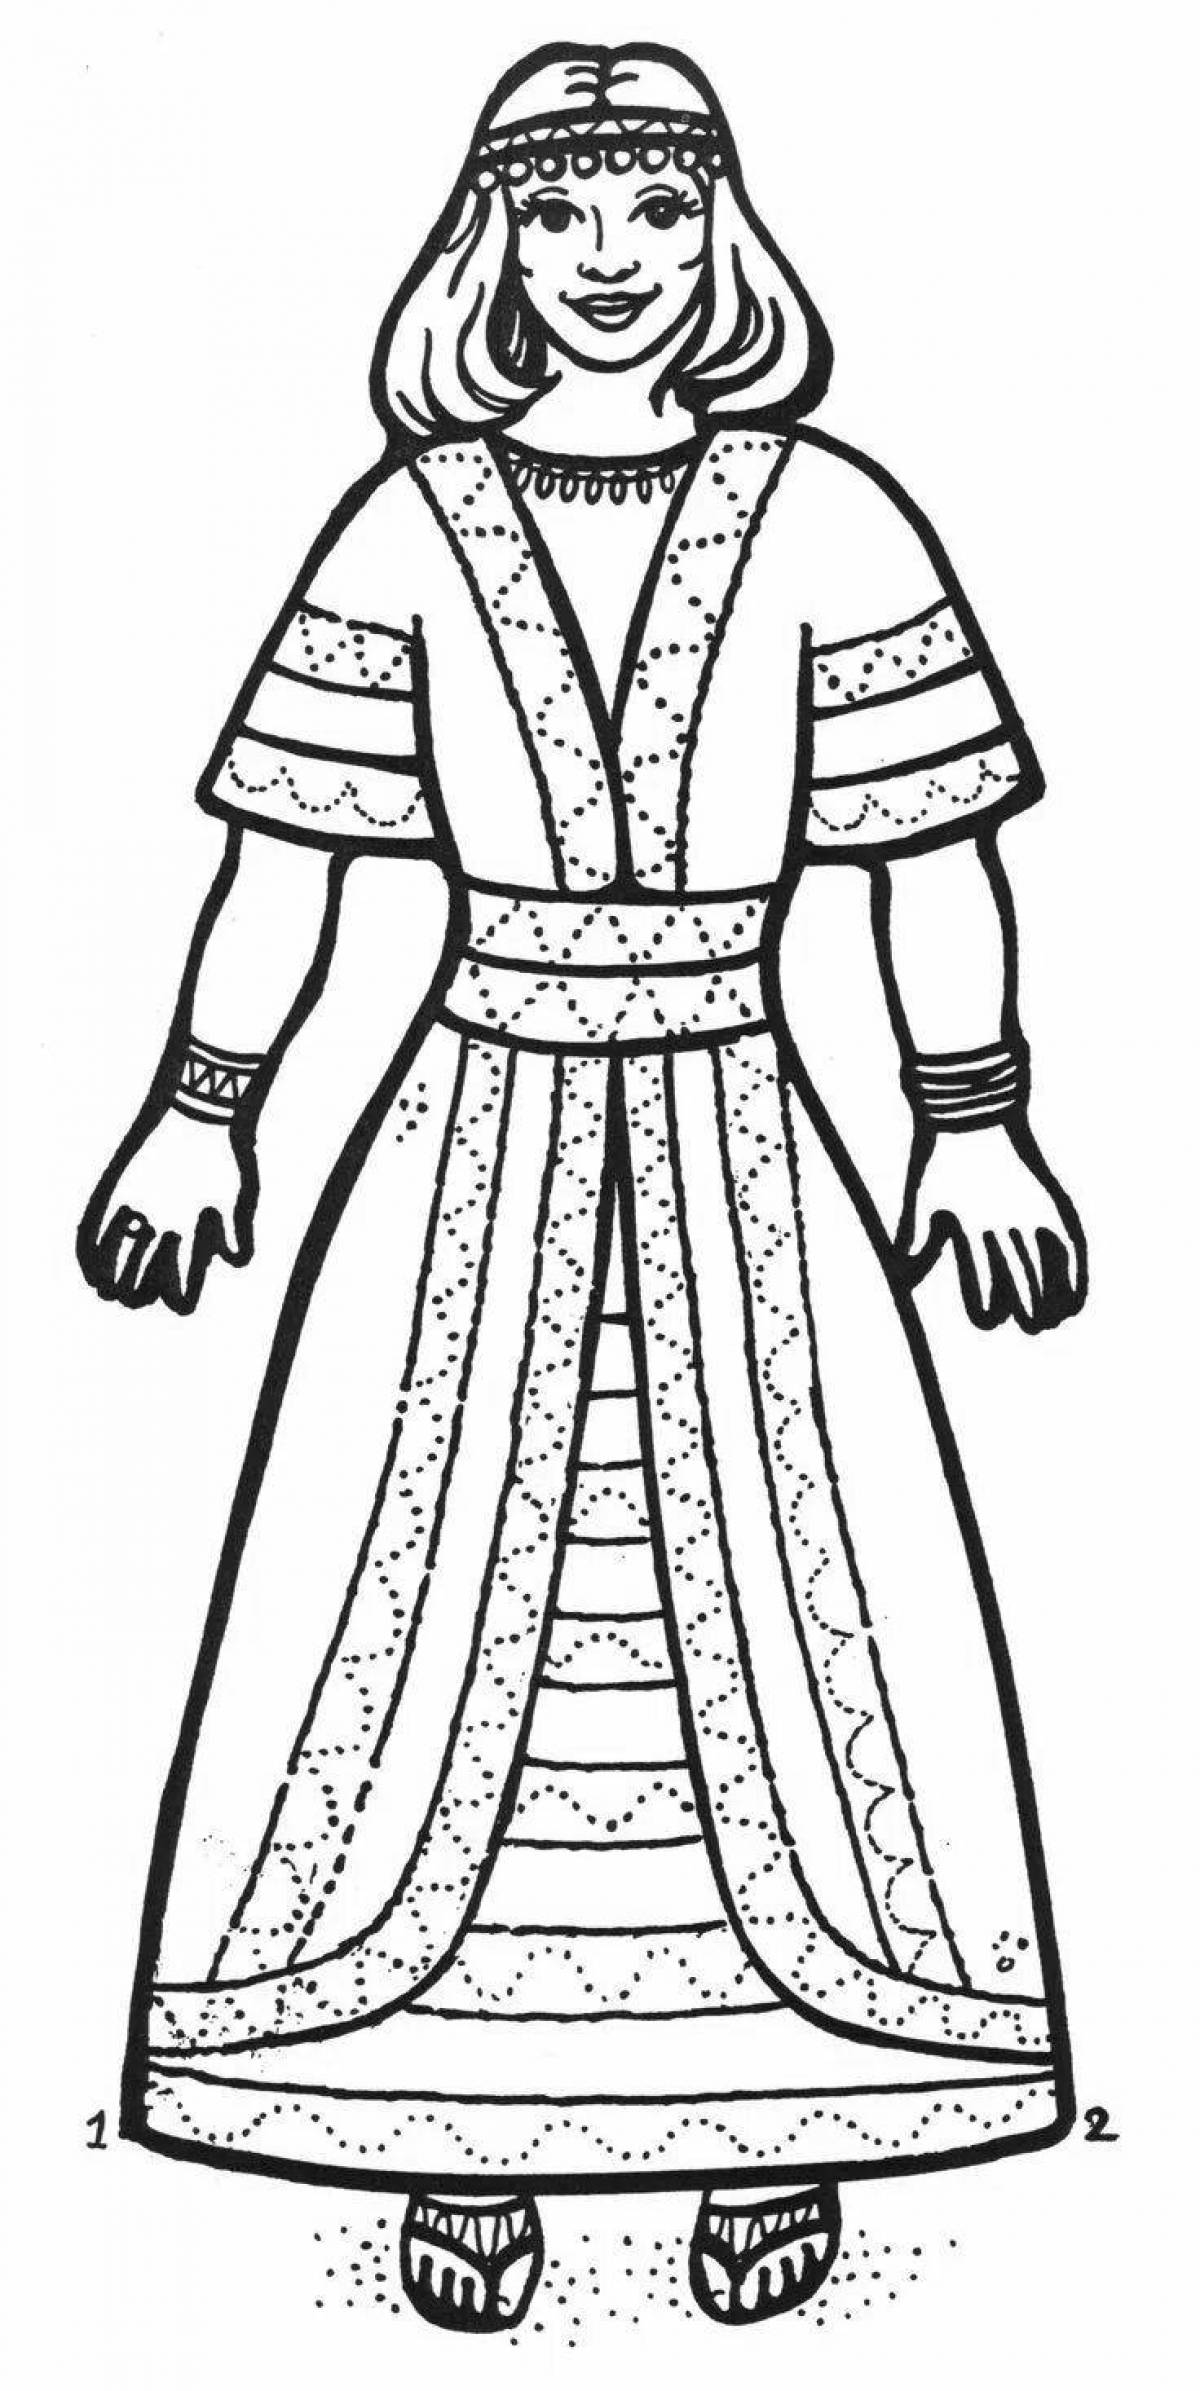 Colorful tomyris coloring page for kids